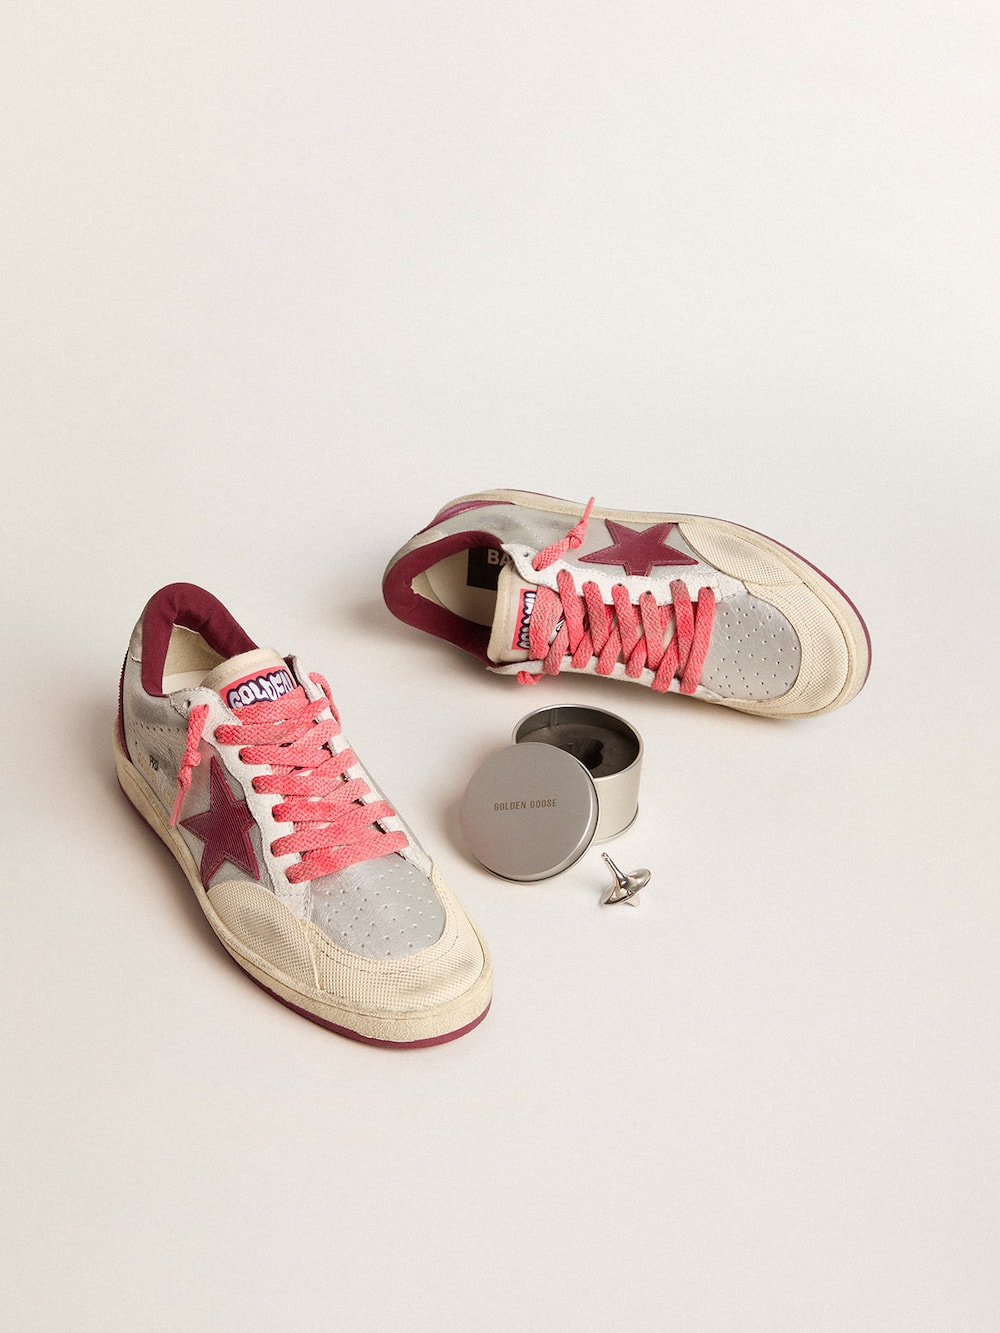 Golden Goose - Men’s Ball Star Pro in silver crackle leather with burgundy star in 